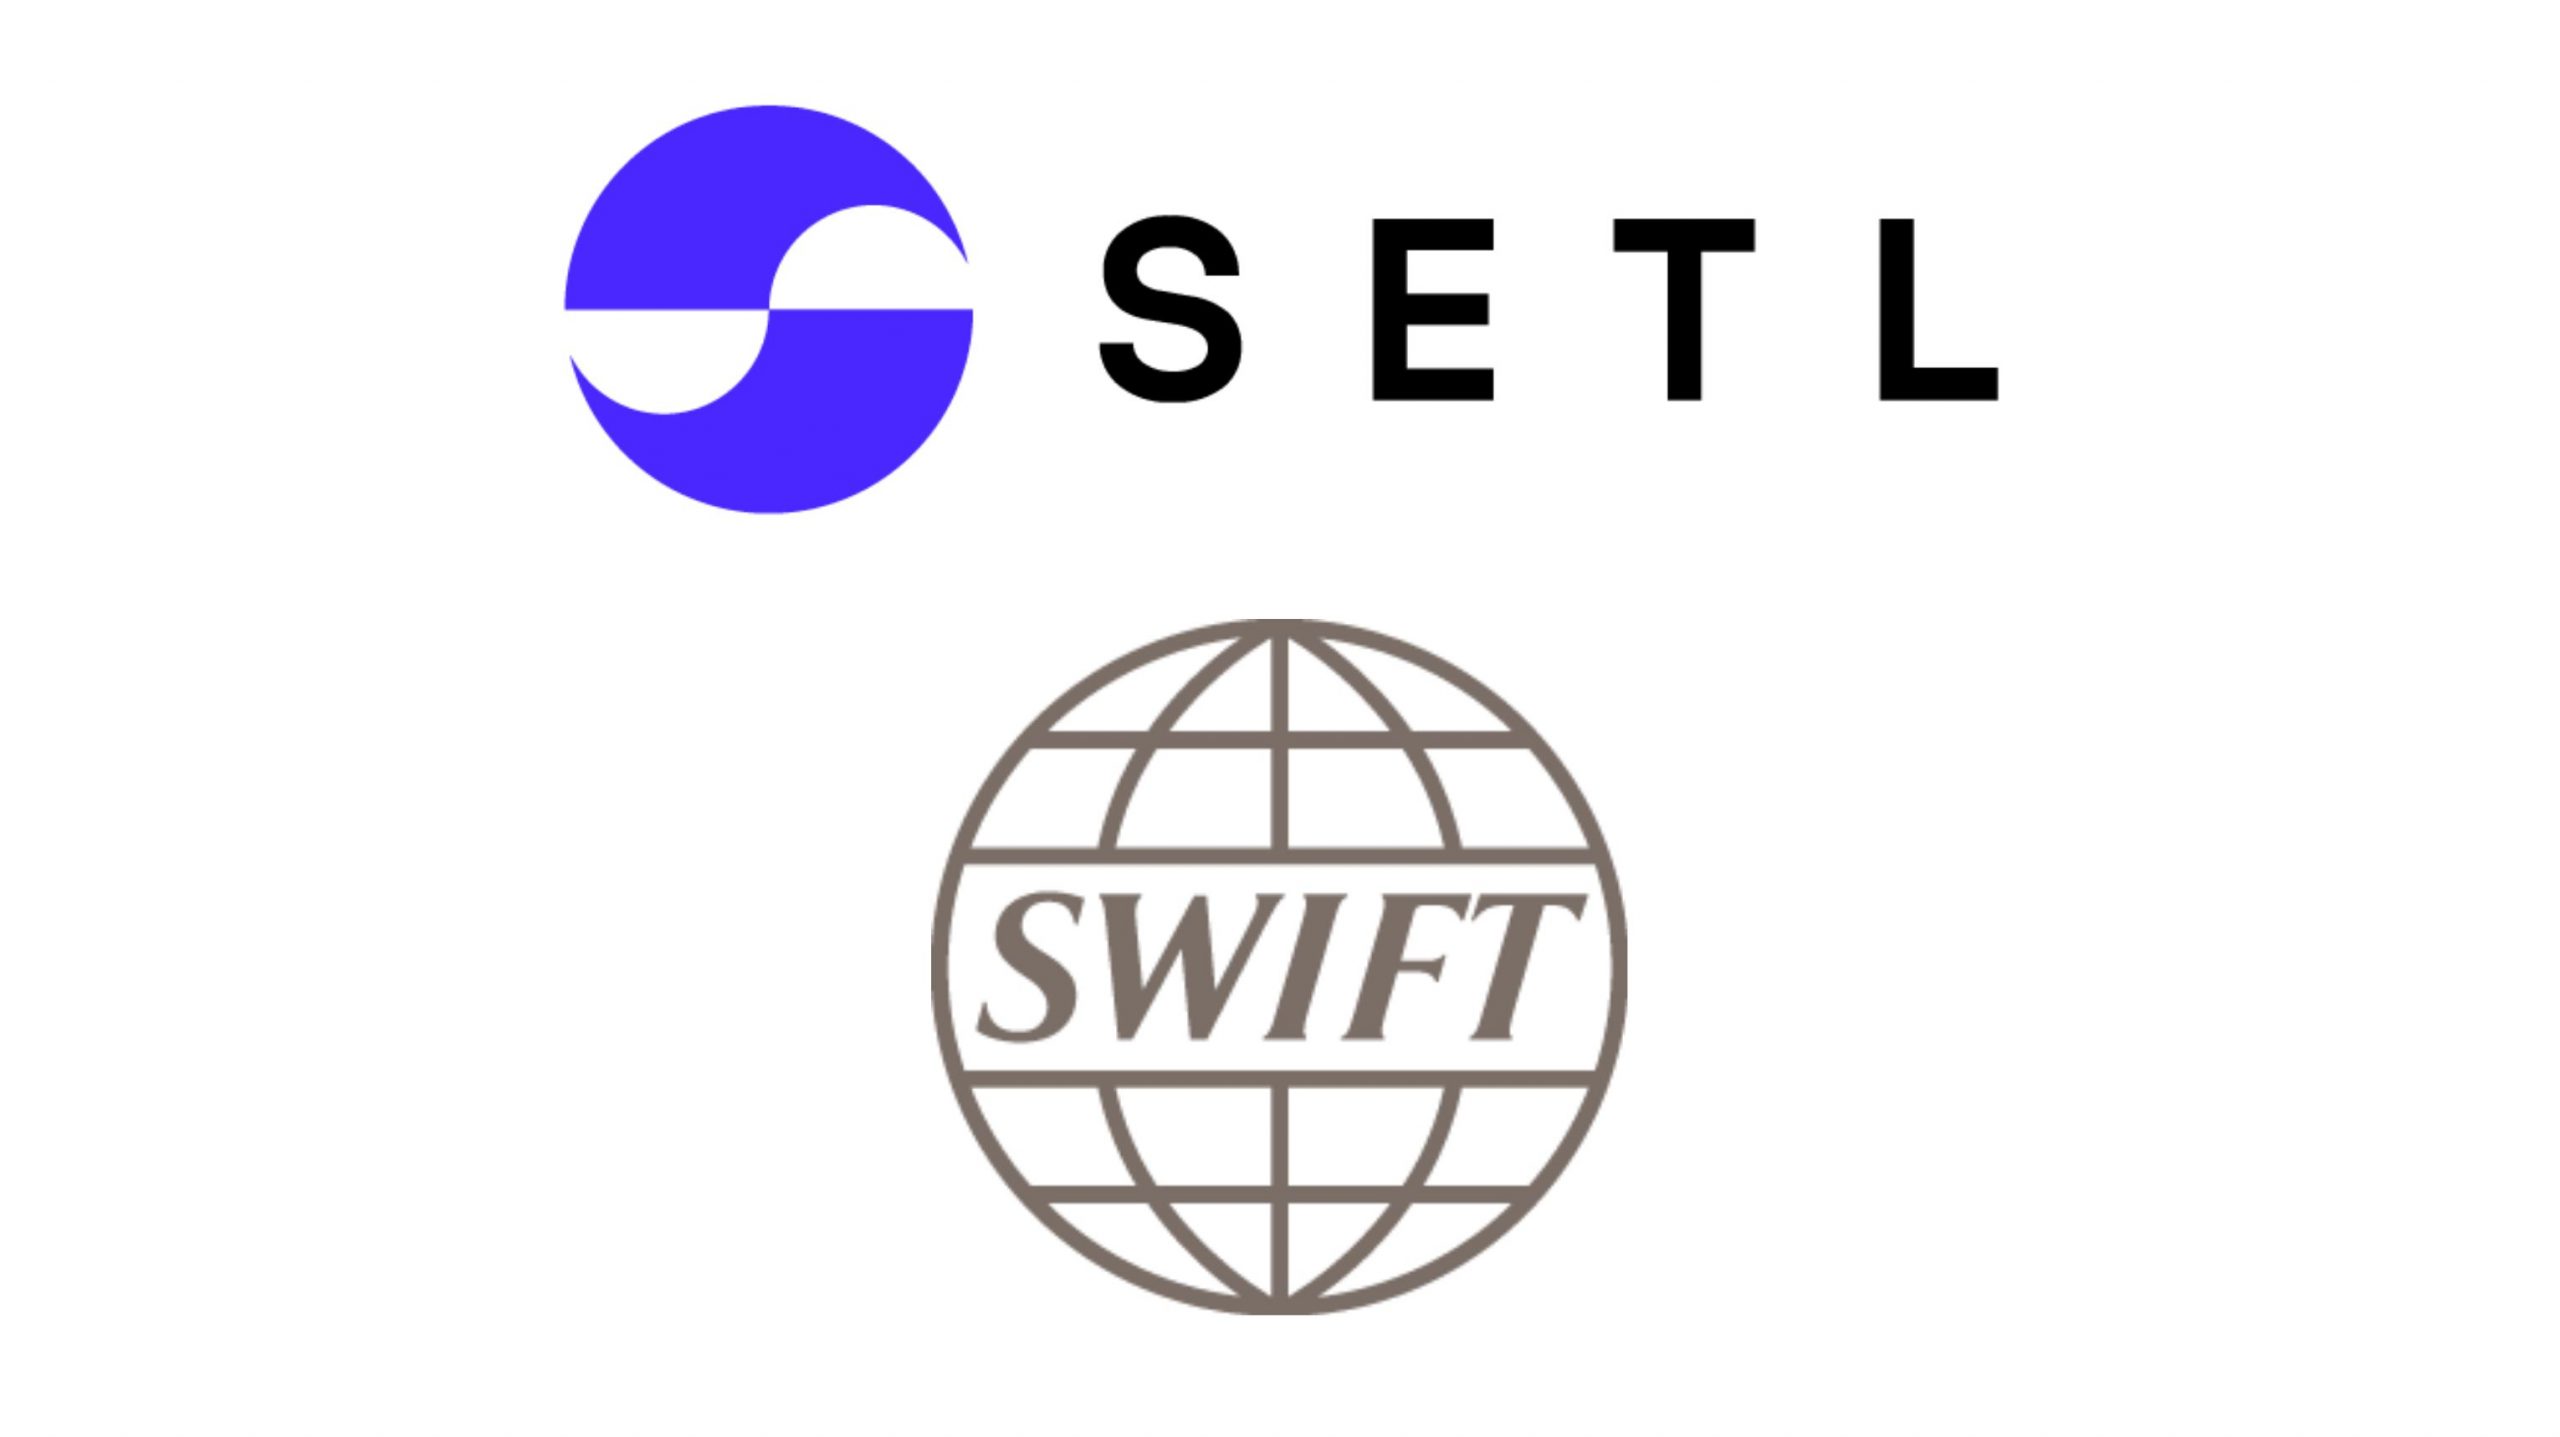 Setl Logo and SWIFT logo featured stacked.